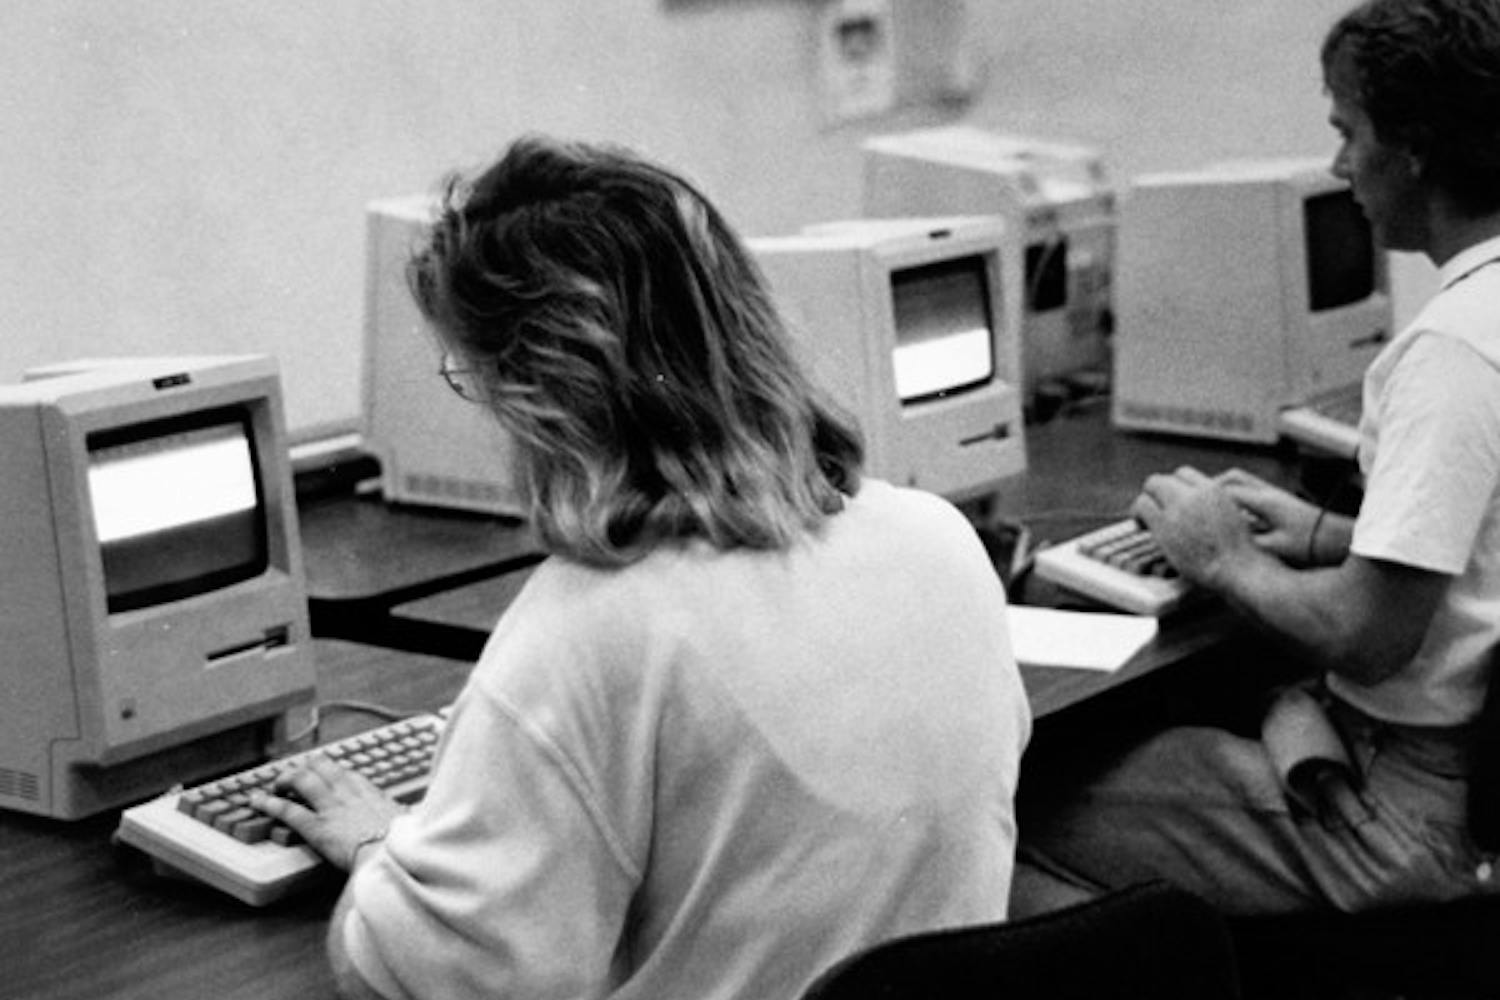 TECHNOLOGY CHANGES FAST: Caryl Grossman, left, and Don Empie, right, use Macintosh computers in their reporting labs in the Journalism department in the ‘80s. (Photo by State Press Photo Staff)